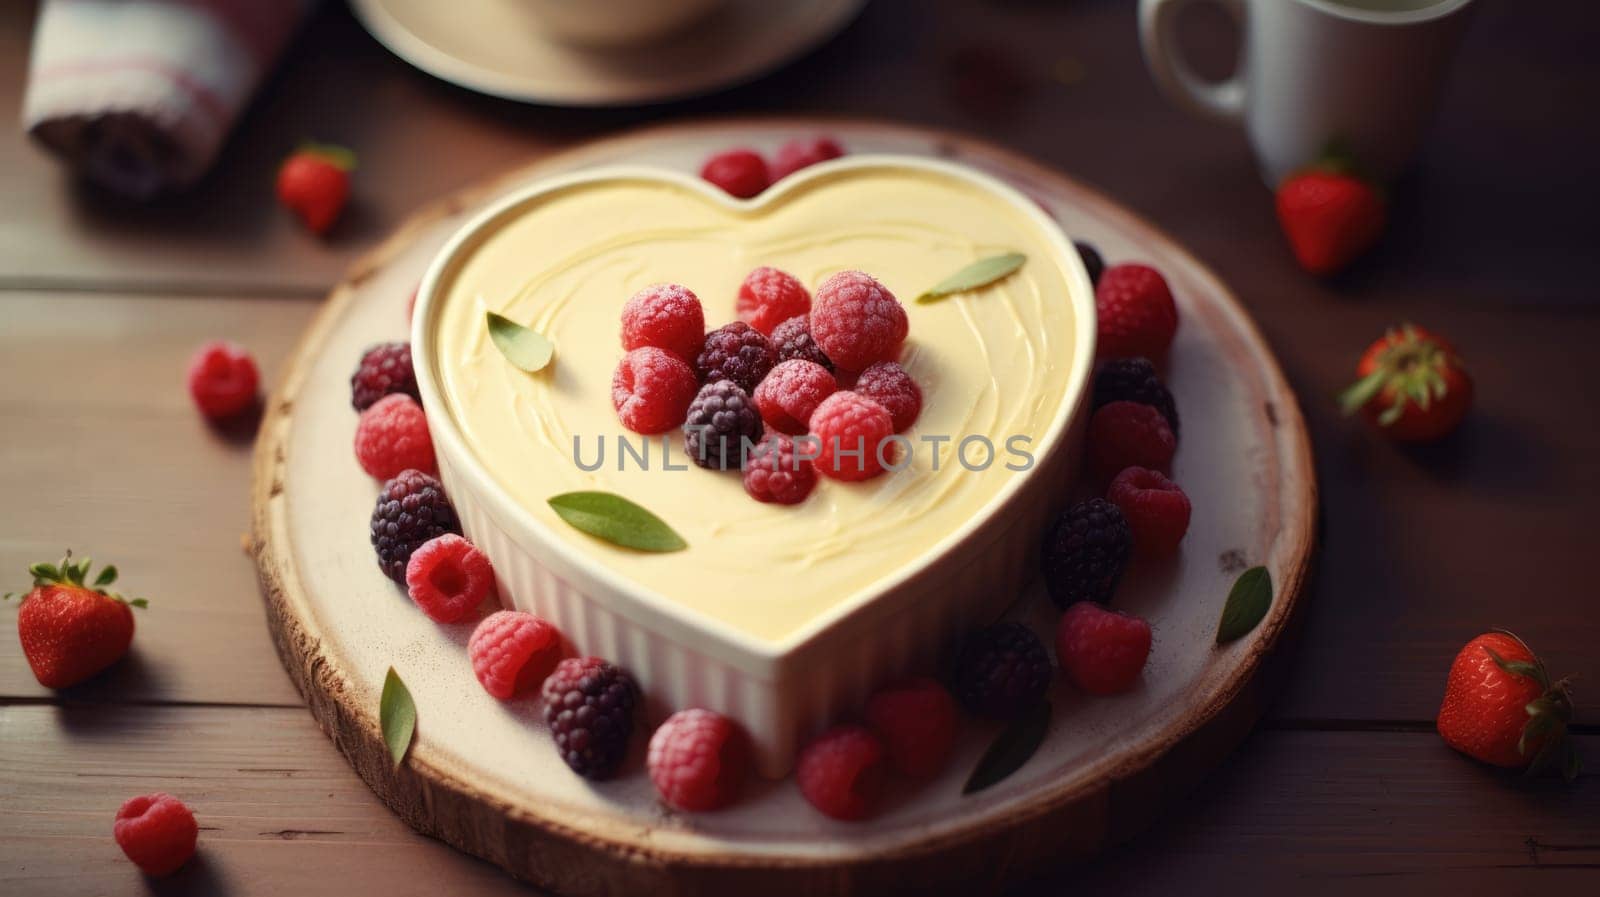 Valentines day heart shaped cheese cake with strawberries on wooden plate. Valentines day dessert. Top view with copy space